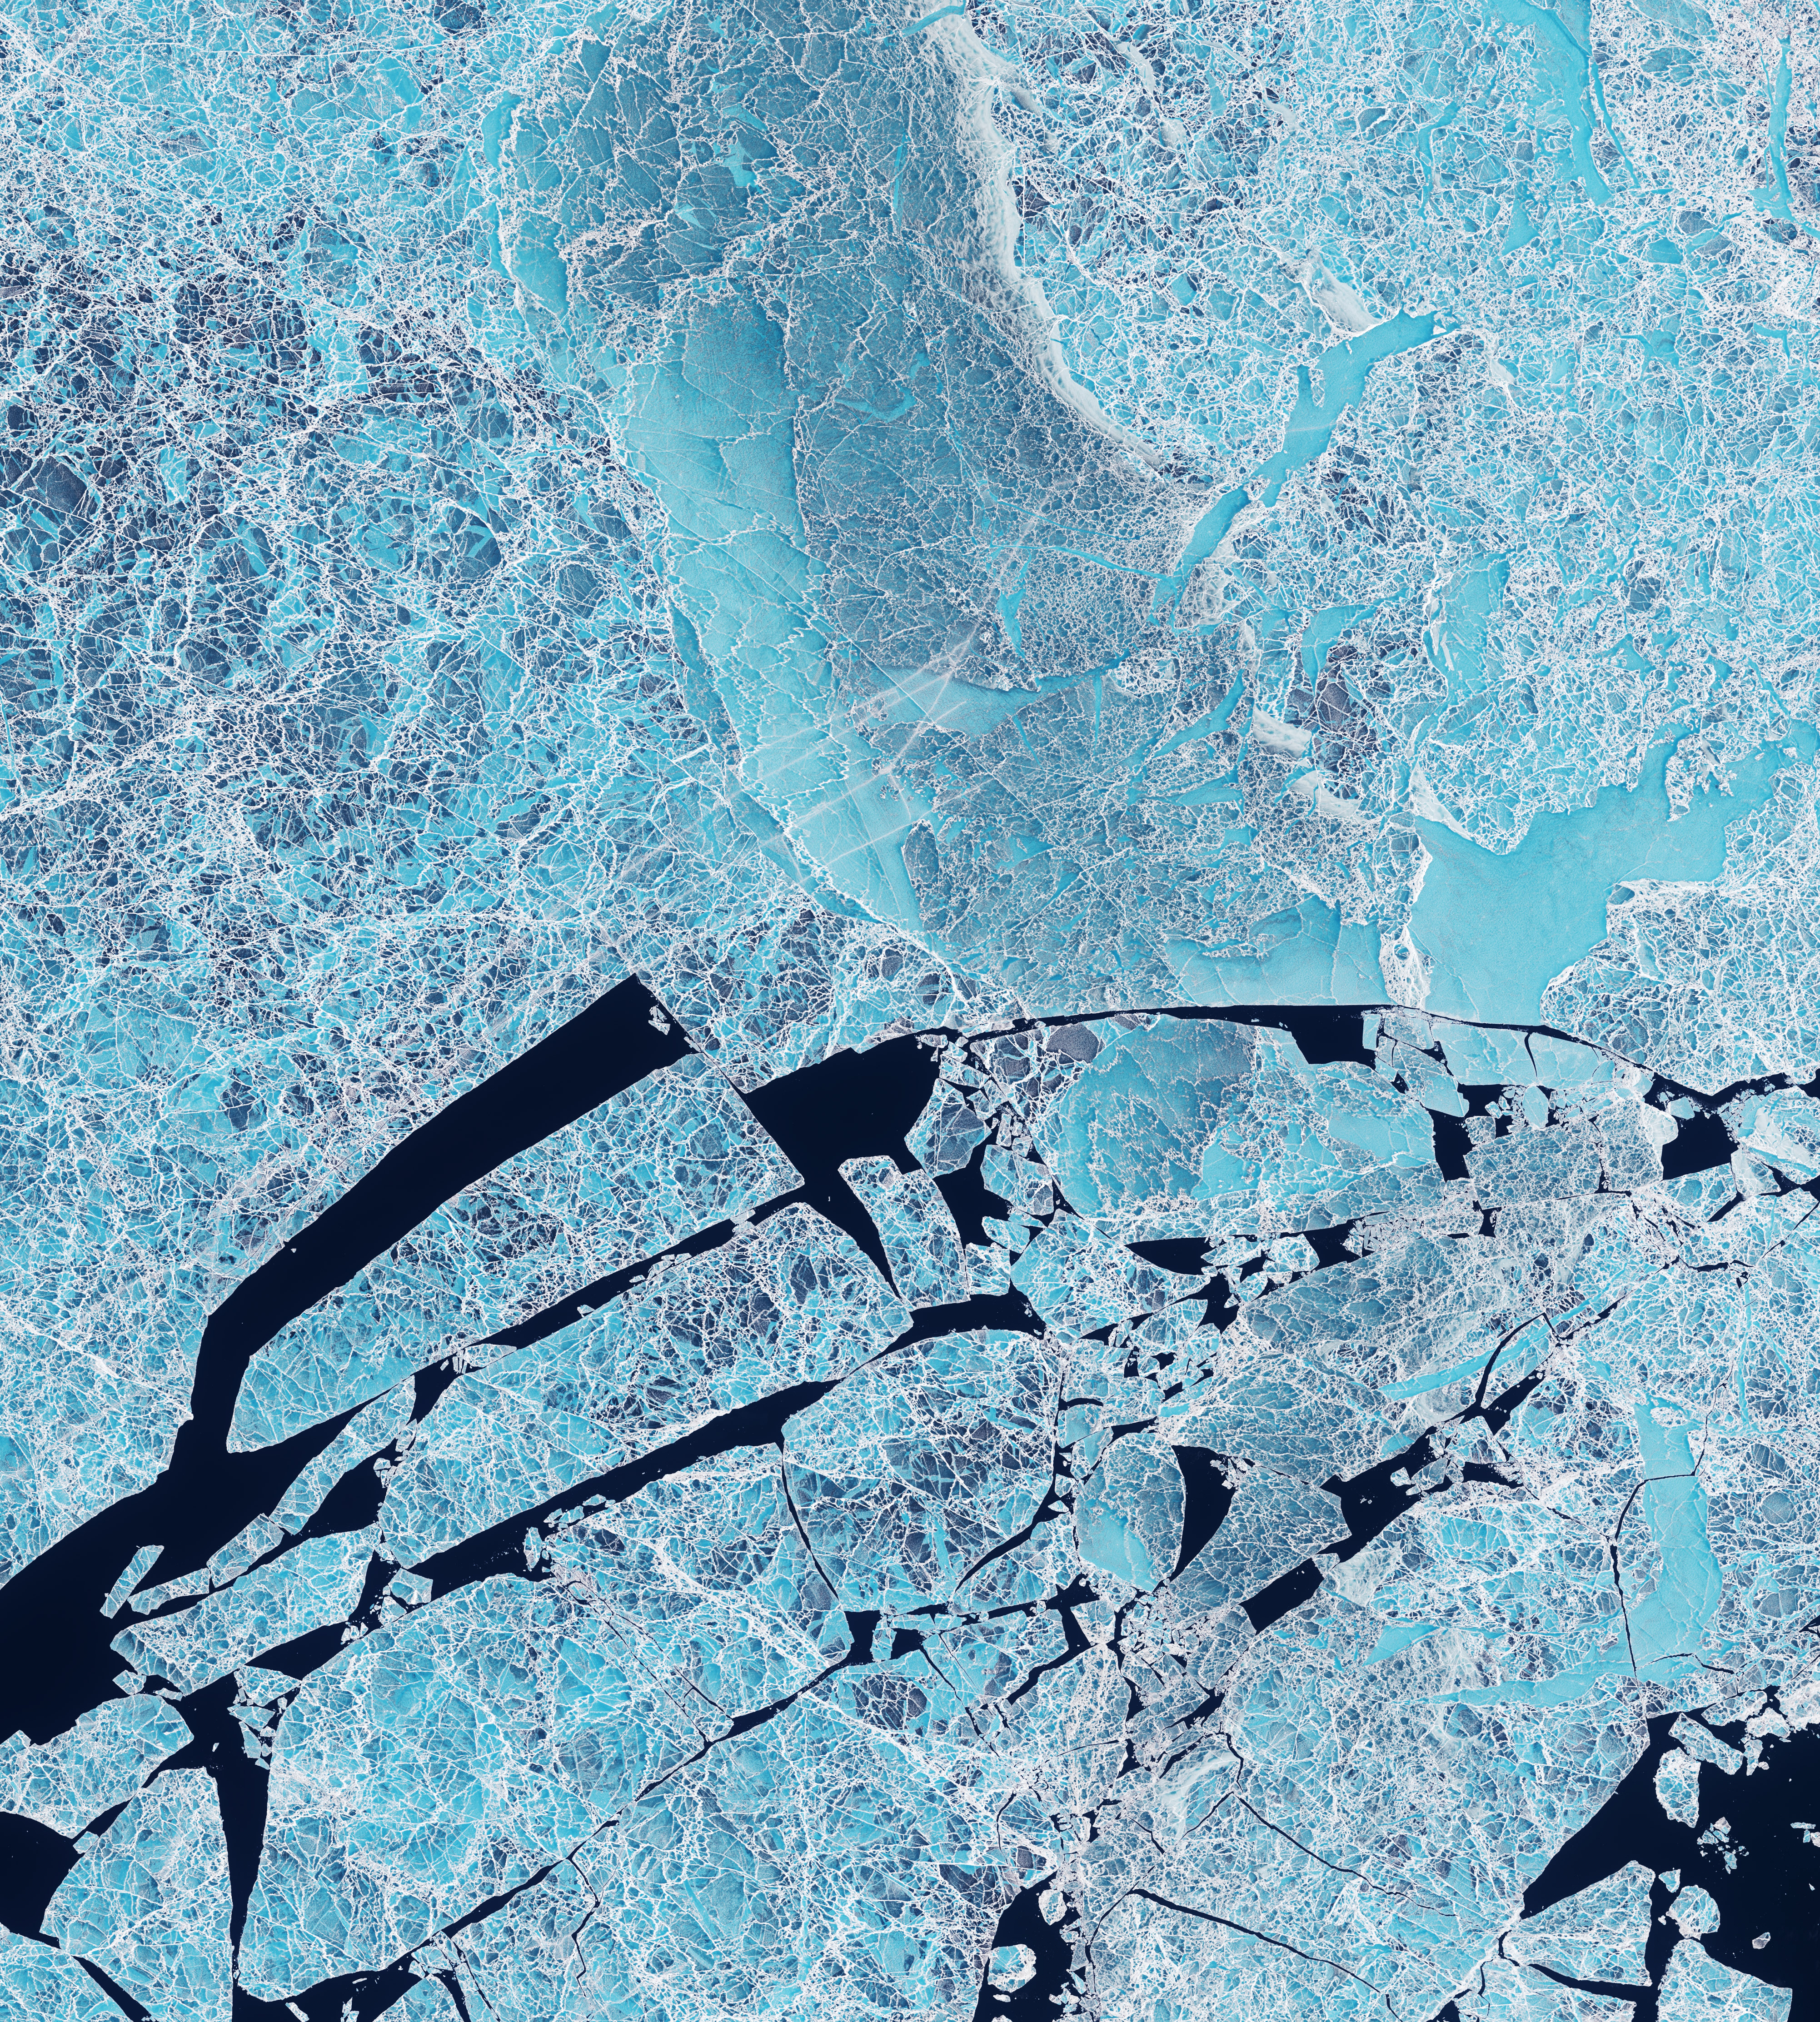 Icy Art in the Sannikov Strait - related image preview